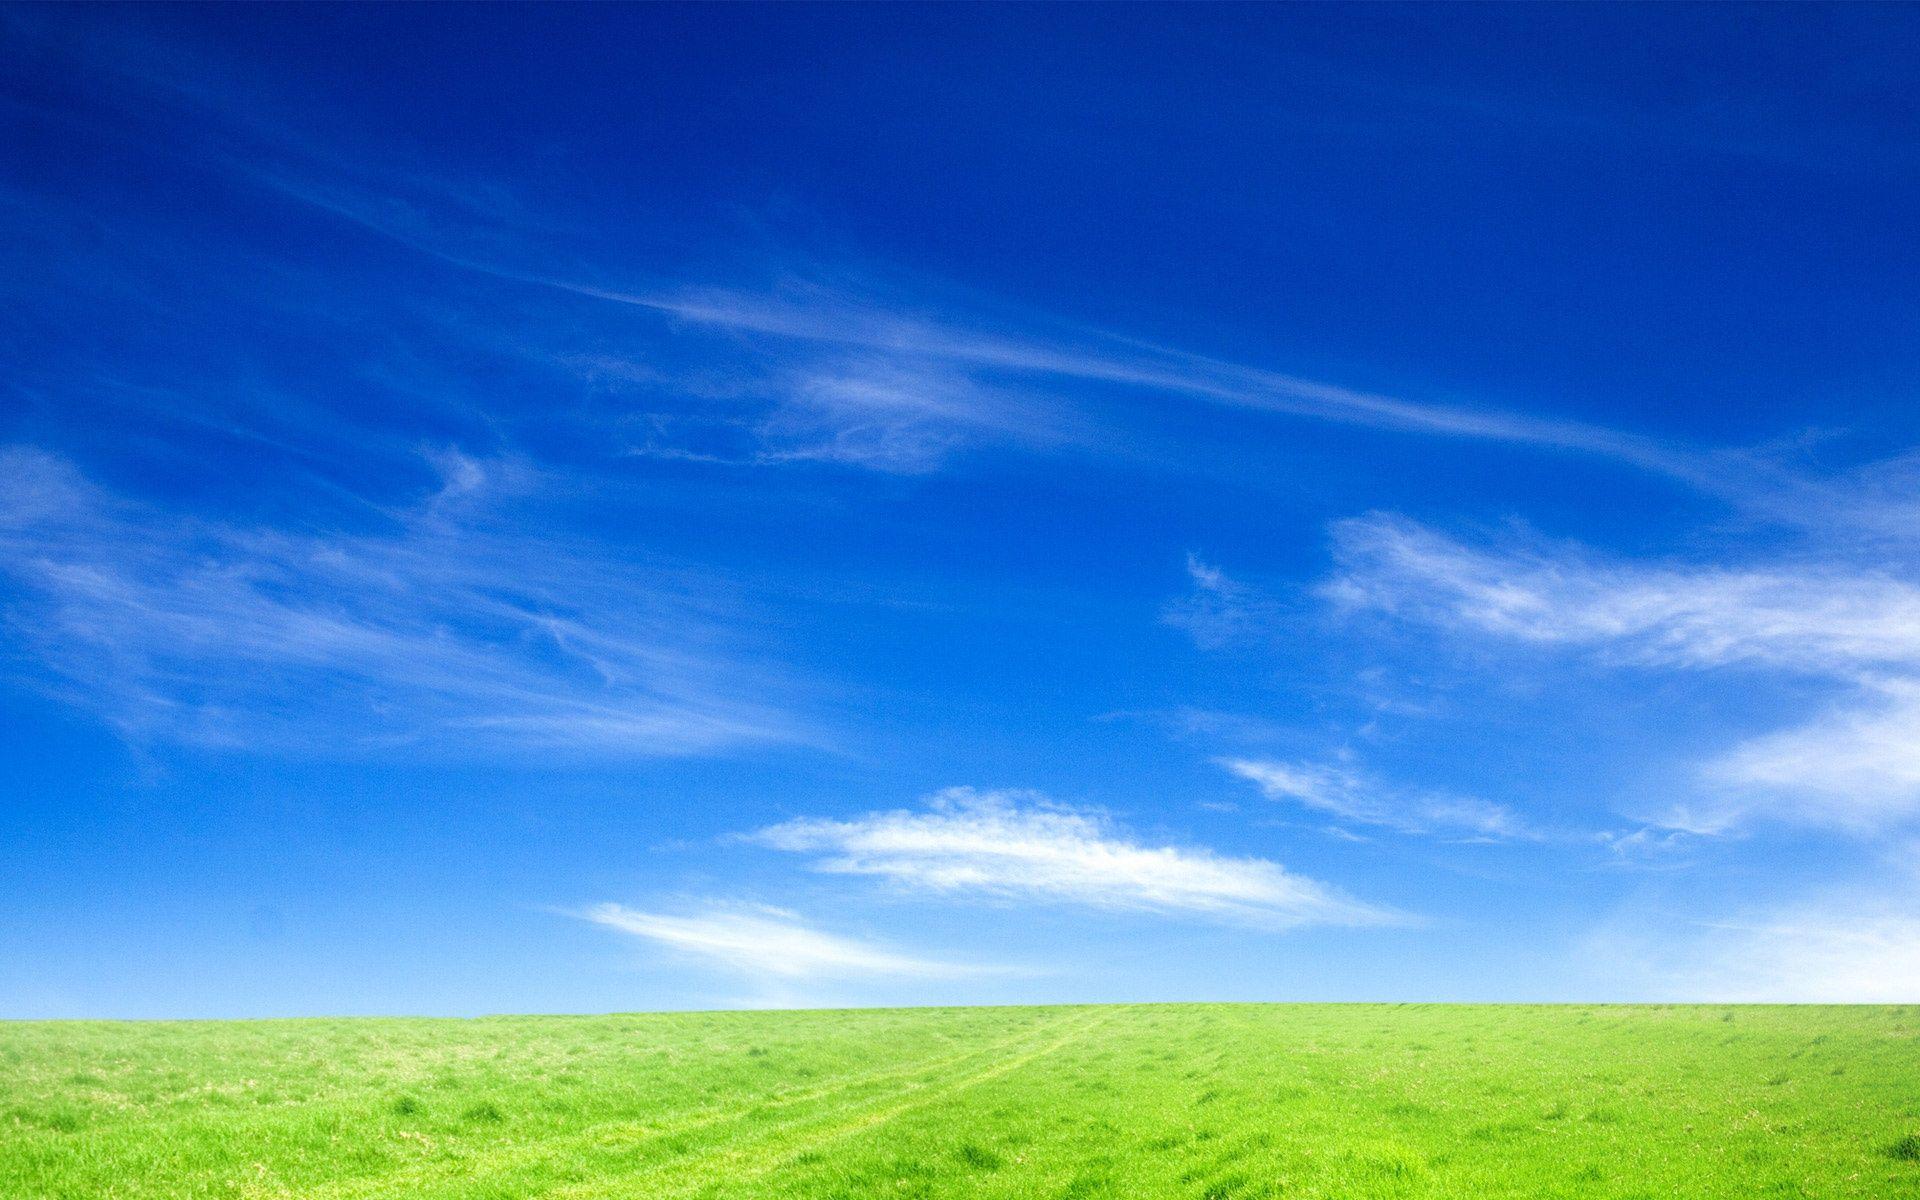 Blue Sky and Green Grass Wallpaper in jpg format for free download